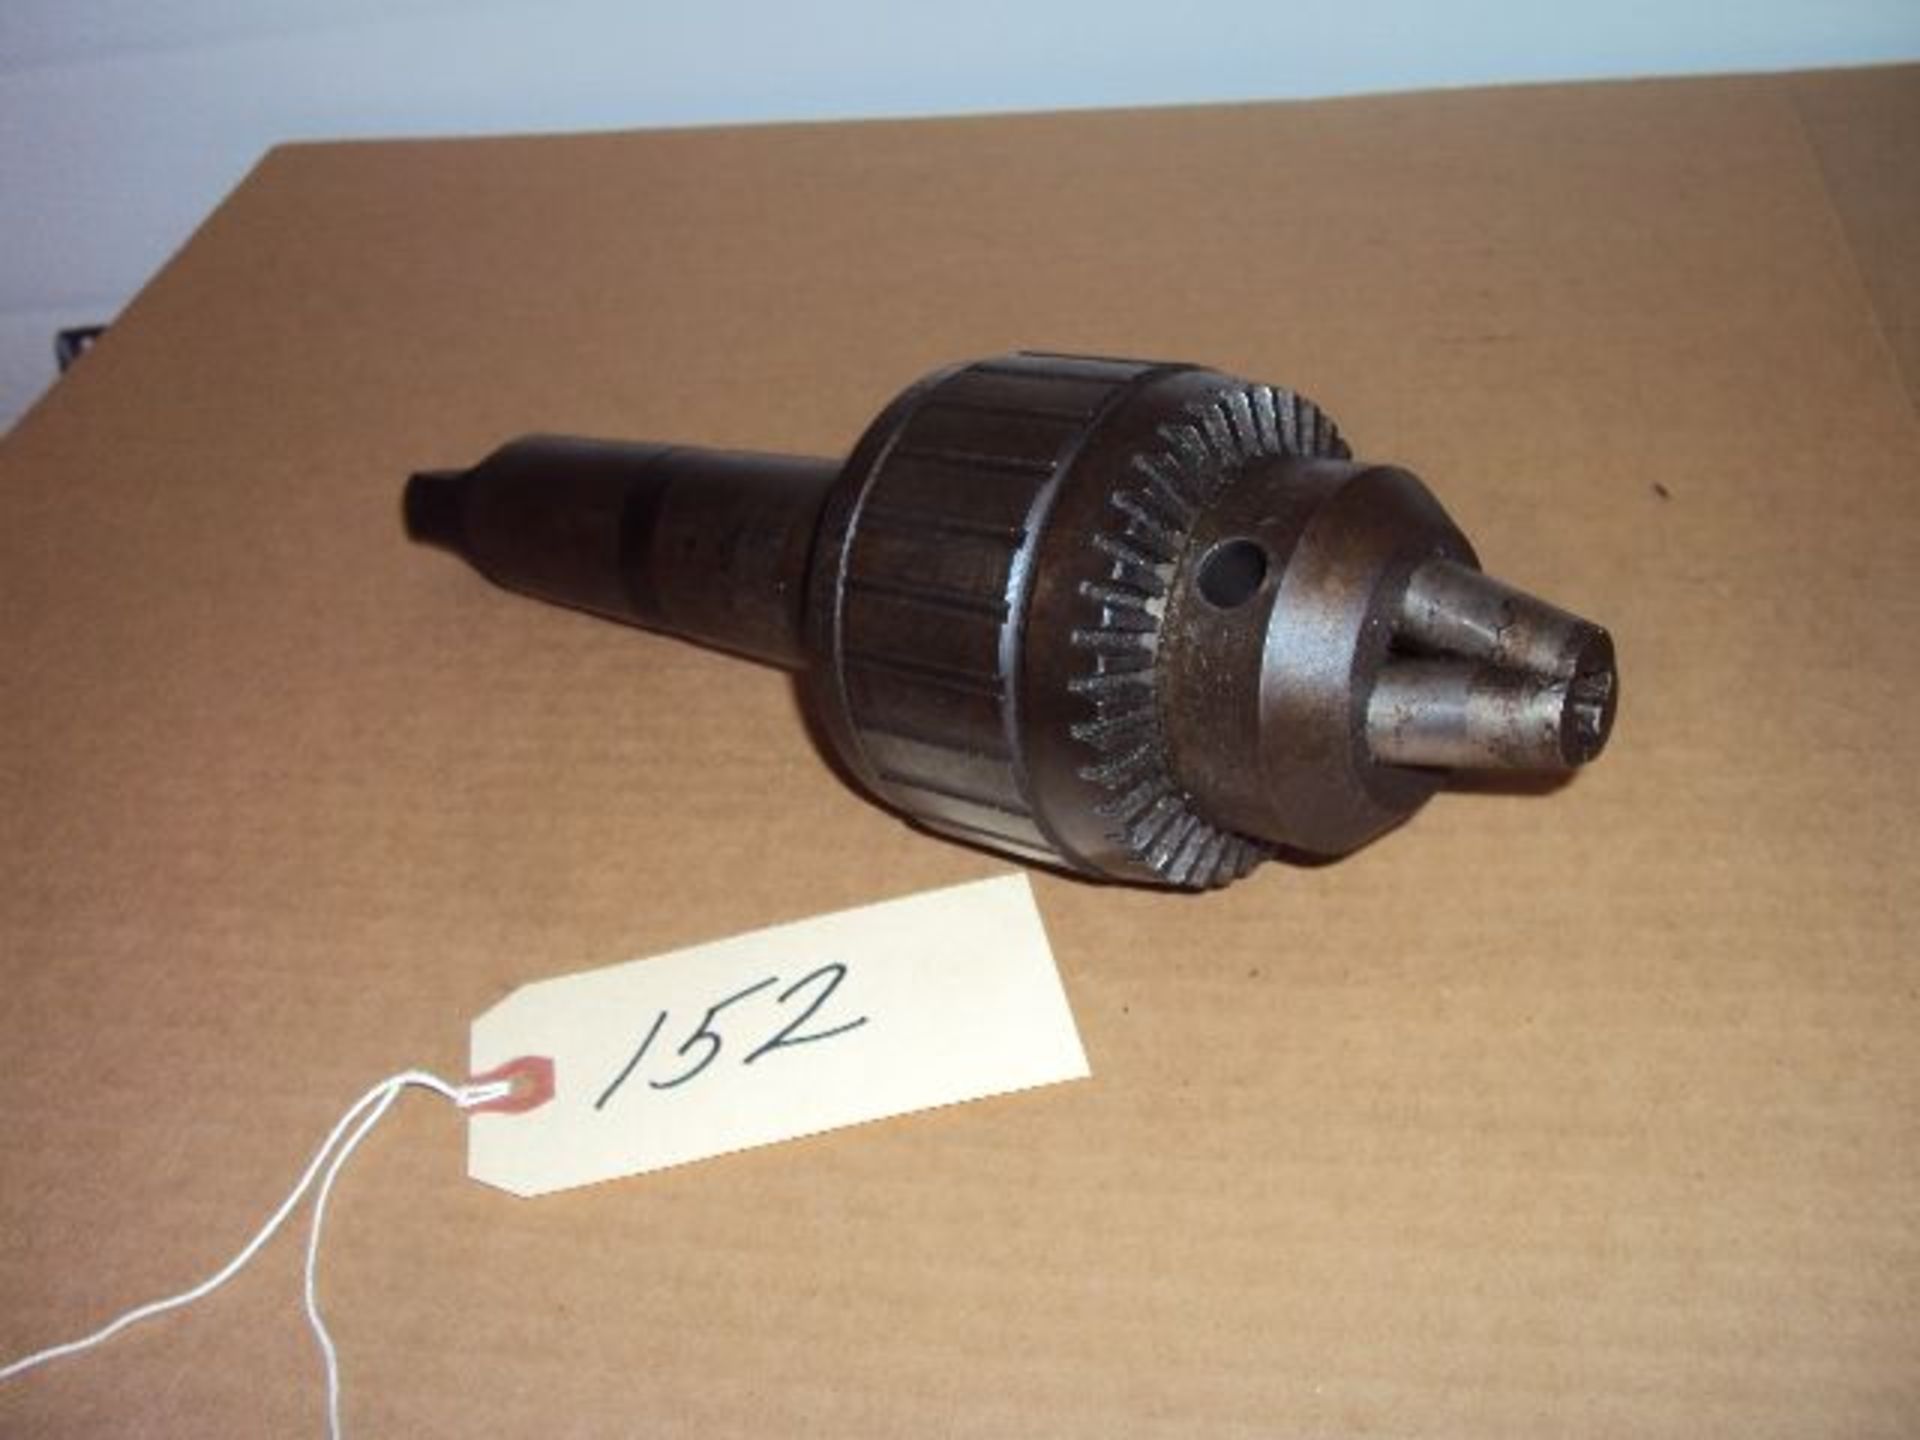 Jacobs No. 20N Super Ball Bearing Drill Chuck with Jacobs MT5 Shank - Image 2 of 6